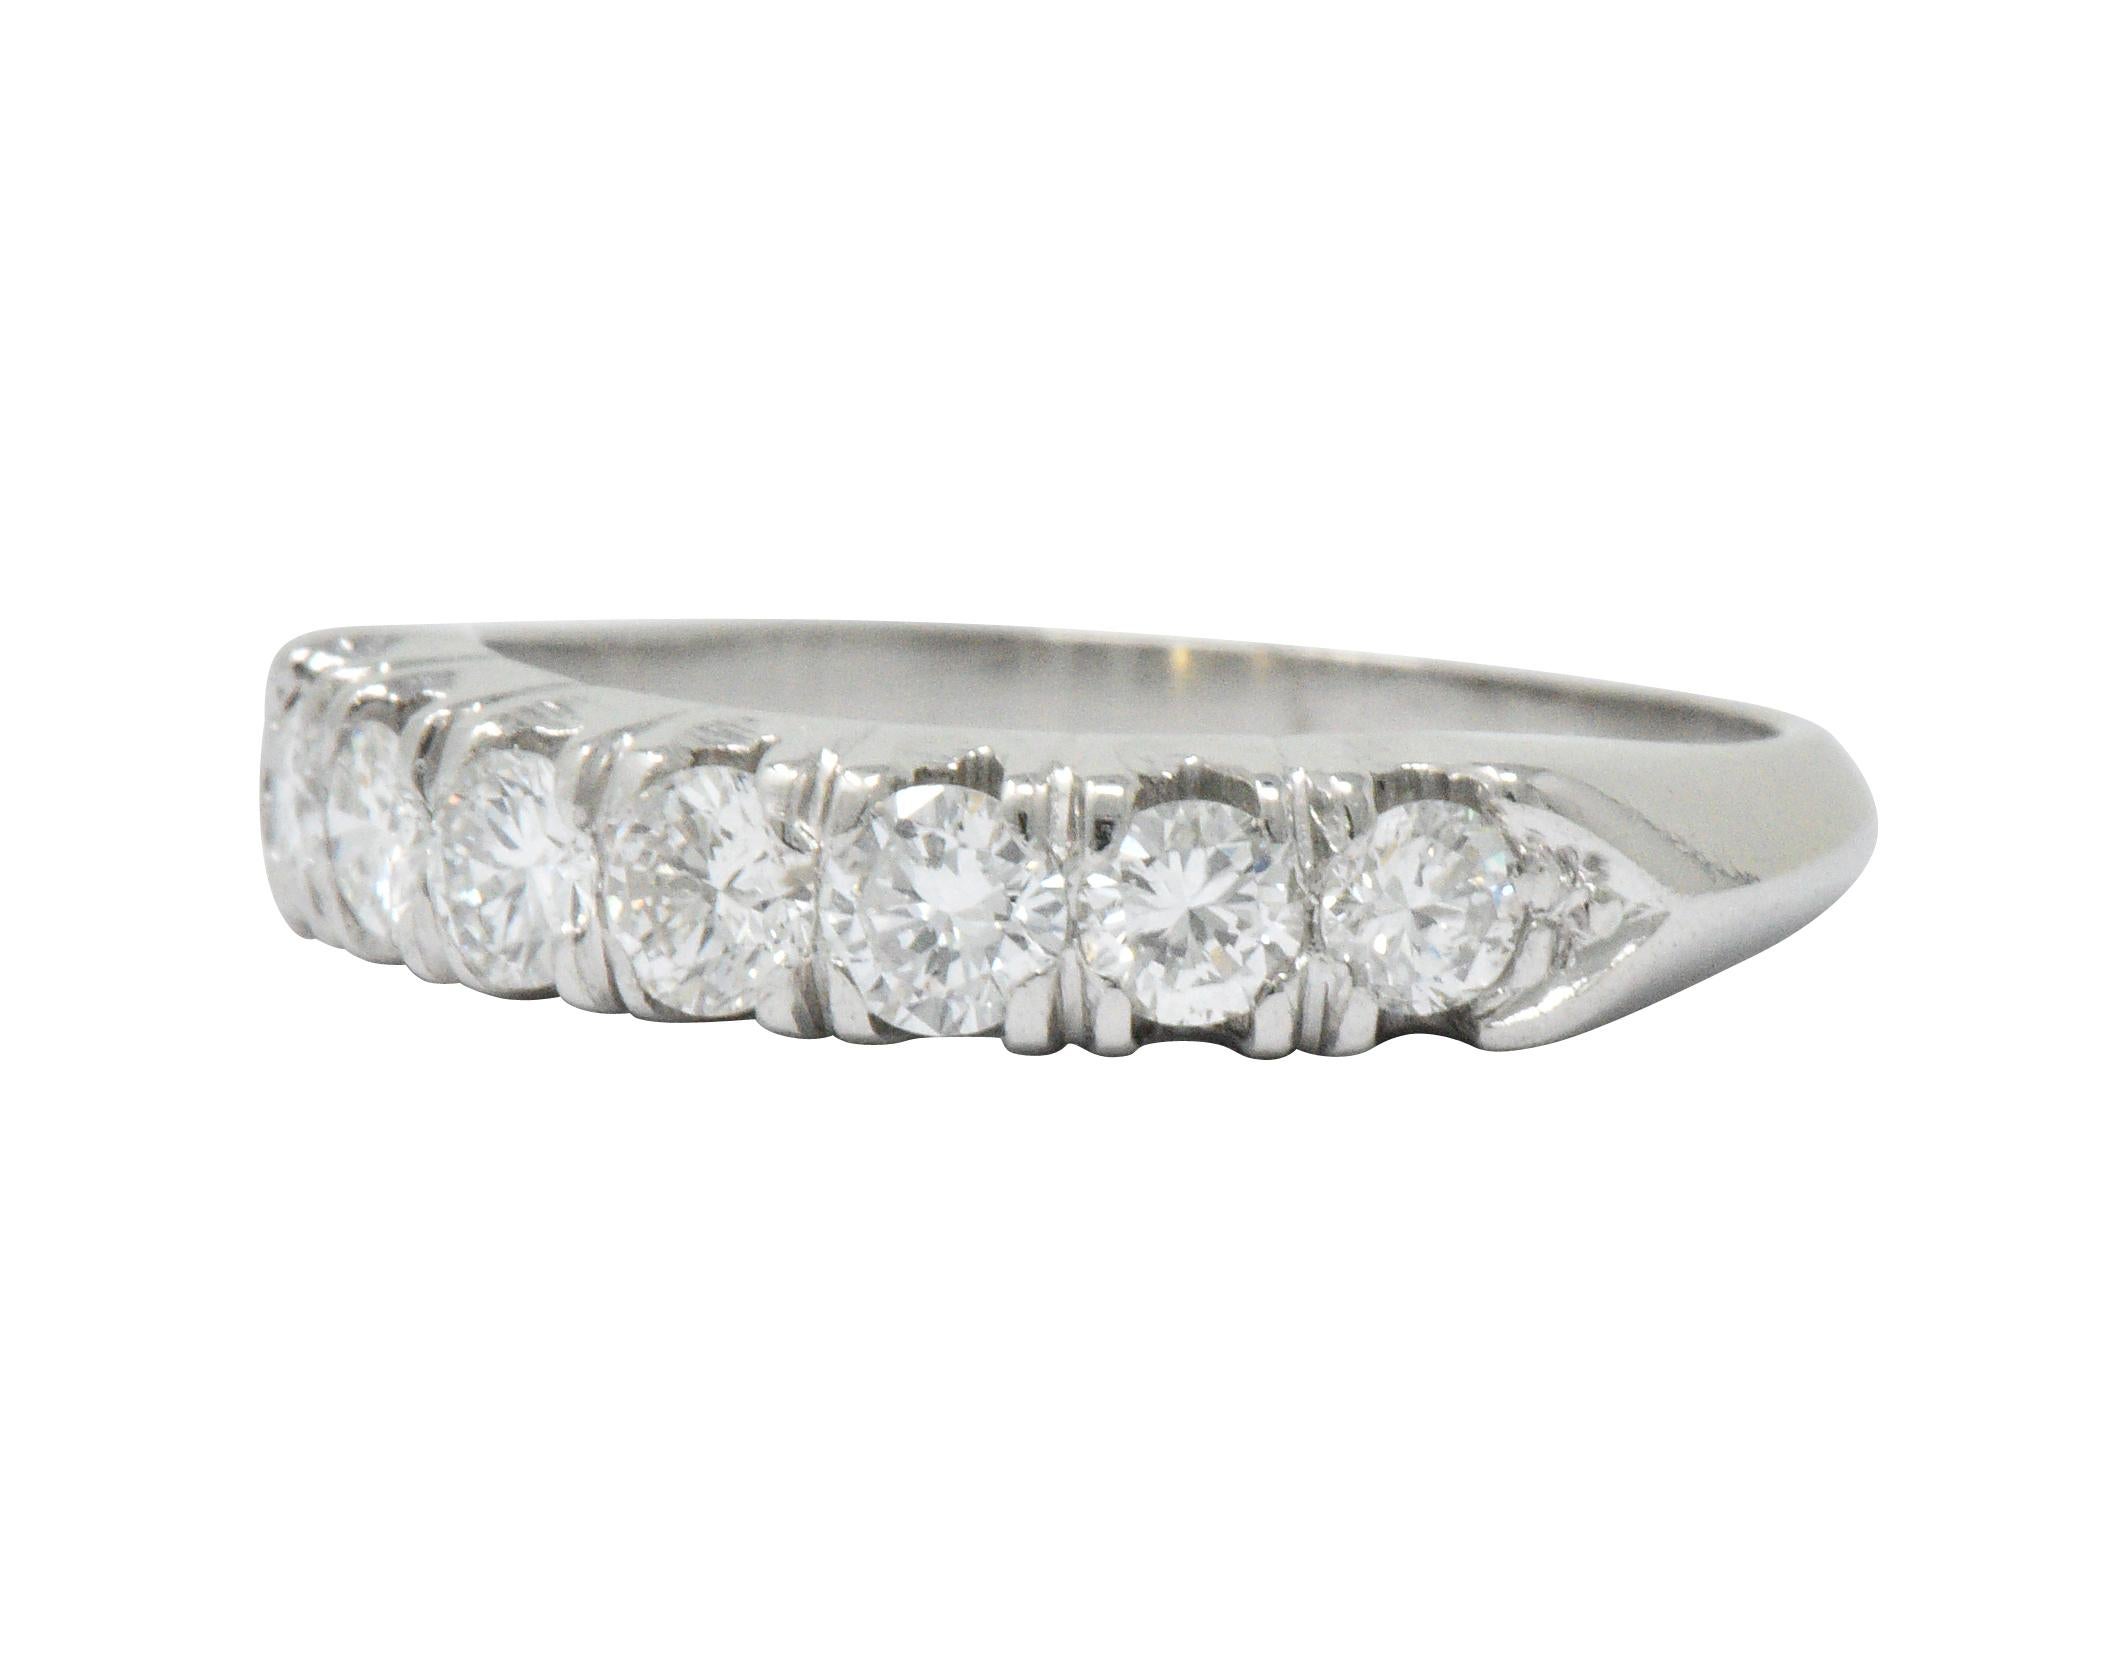 Set to the front with 7 round brilliant cut diamonds weighing approximately 0.75 carats total, G/H color and VS to SI clarity

Prong set with a lovely tapered knife-edge shank for a comfortable profile

Nice stack ring

Ring Size: 7 1/4 &